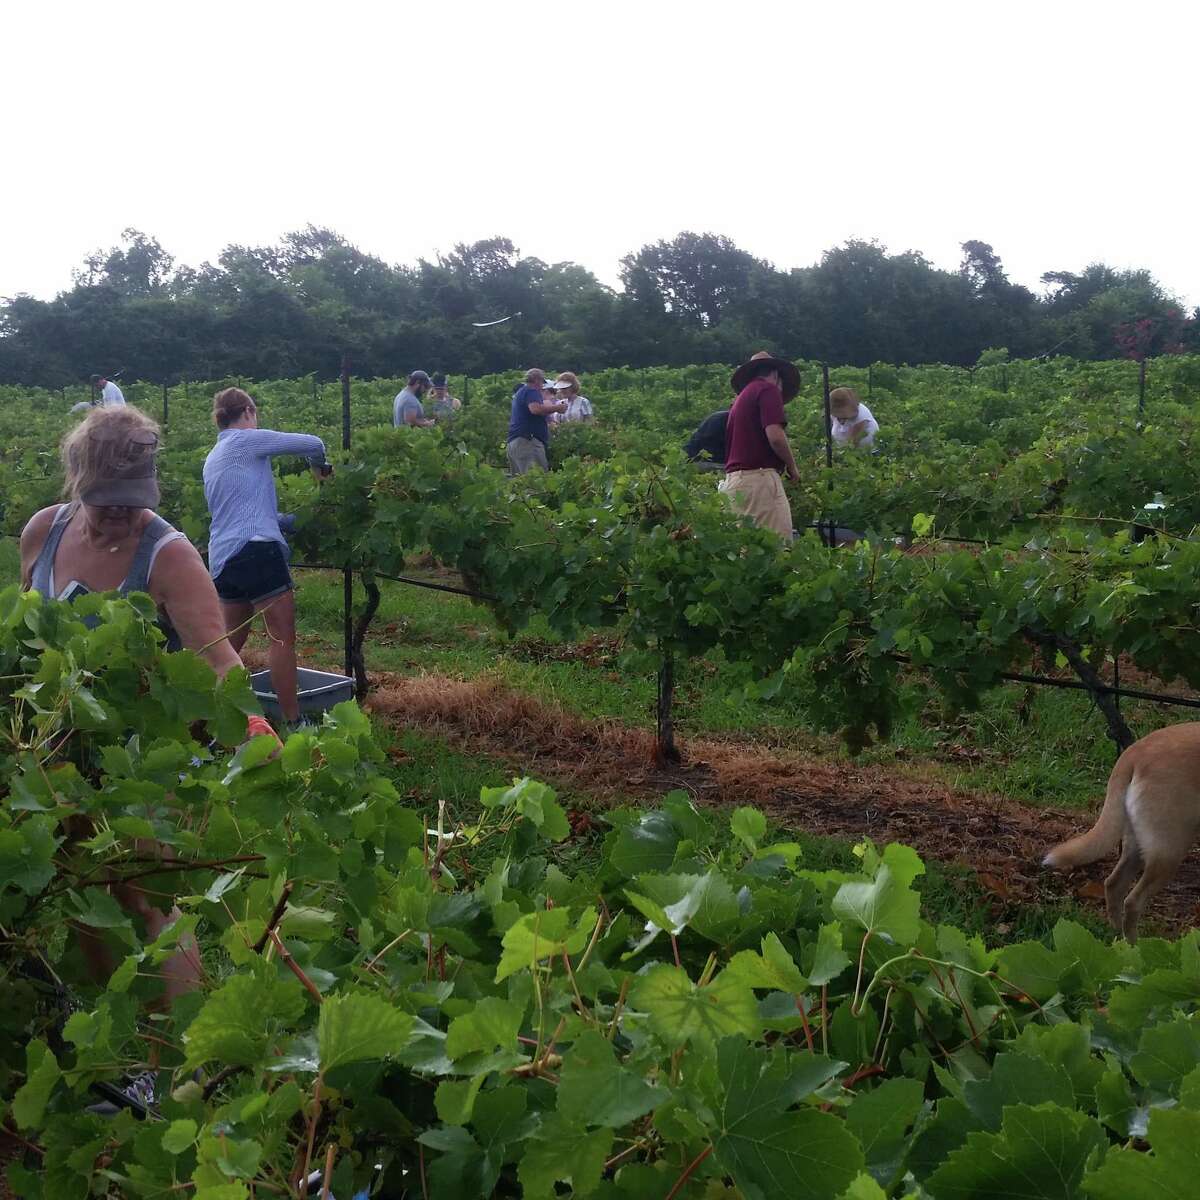 The public was invited to harvest and watch the grape CRUSH at Bernhardt Winery last weekend. This picture shows the early morning crew harvesting grapes a few years ago at Bernhardt Winery.